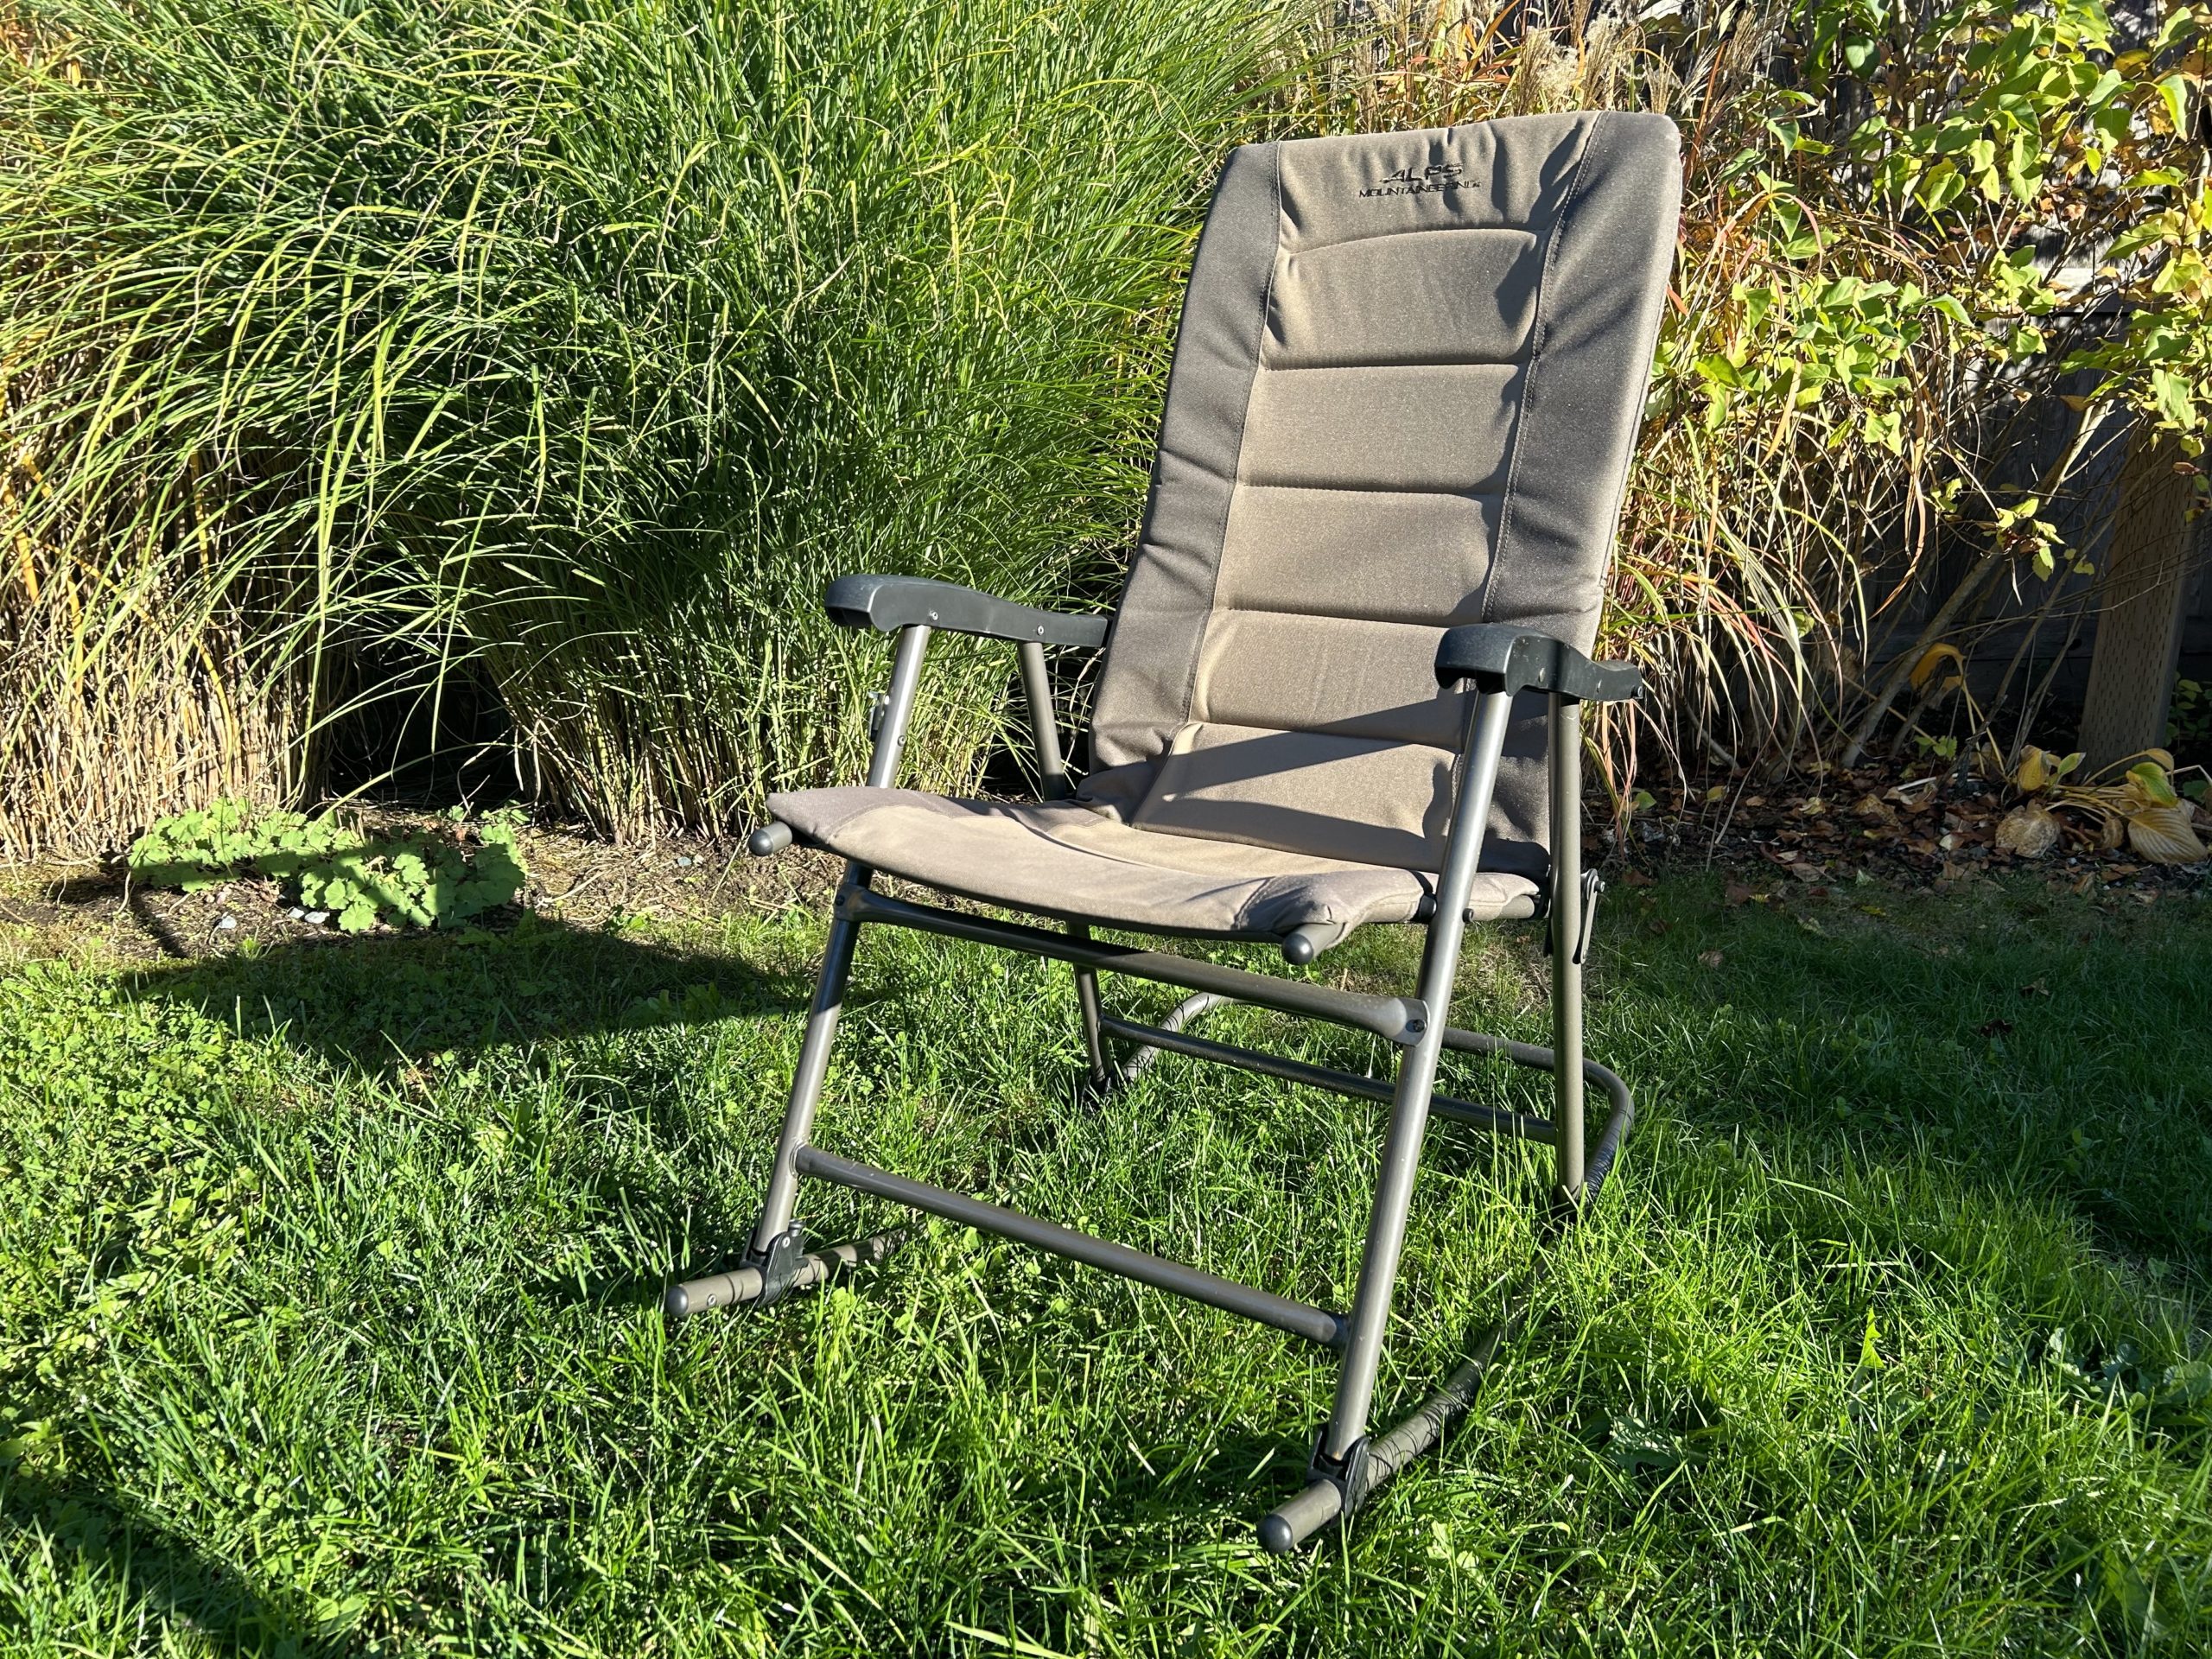 Alps Mountaineering Rocking Chair Review